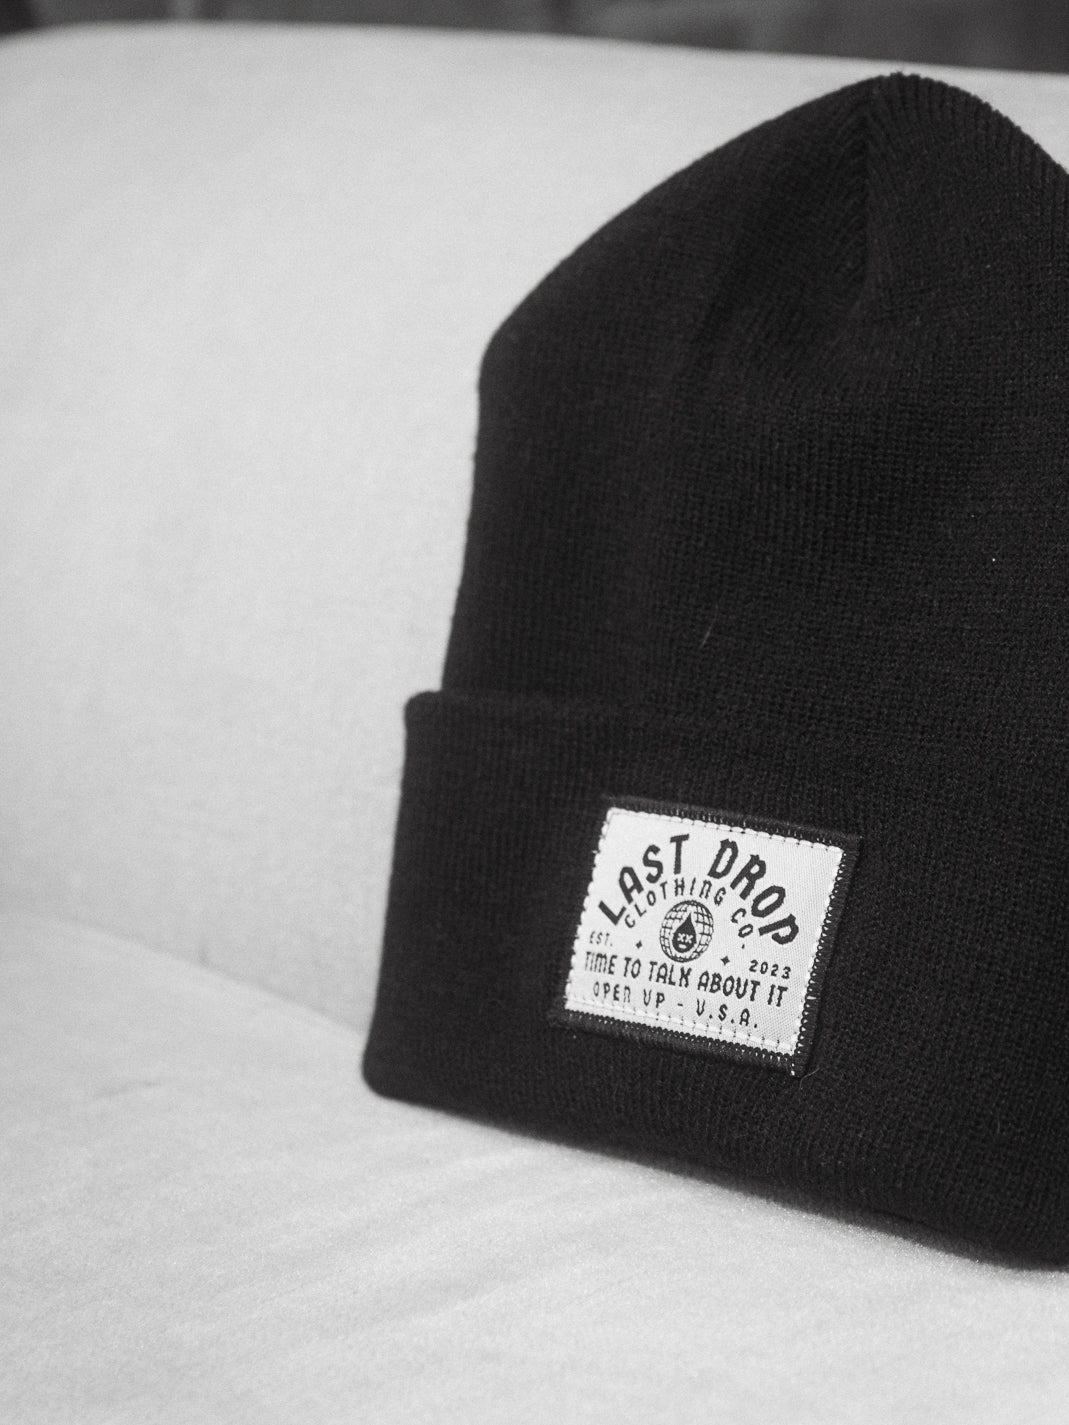 A global-inspired beanie featuring an embroidered patch.